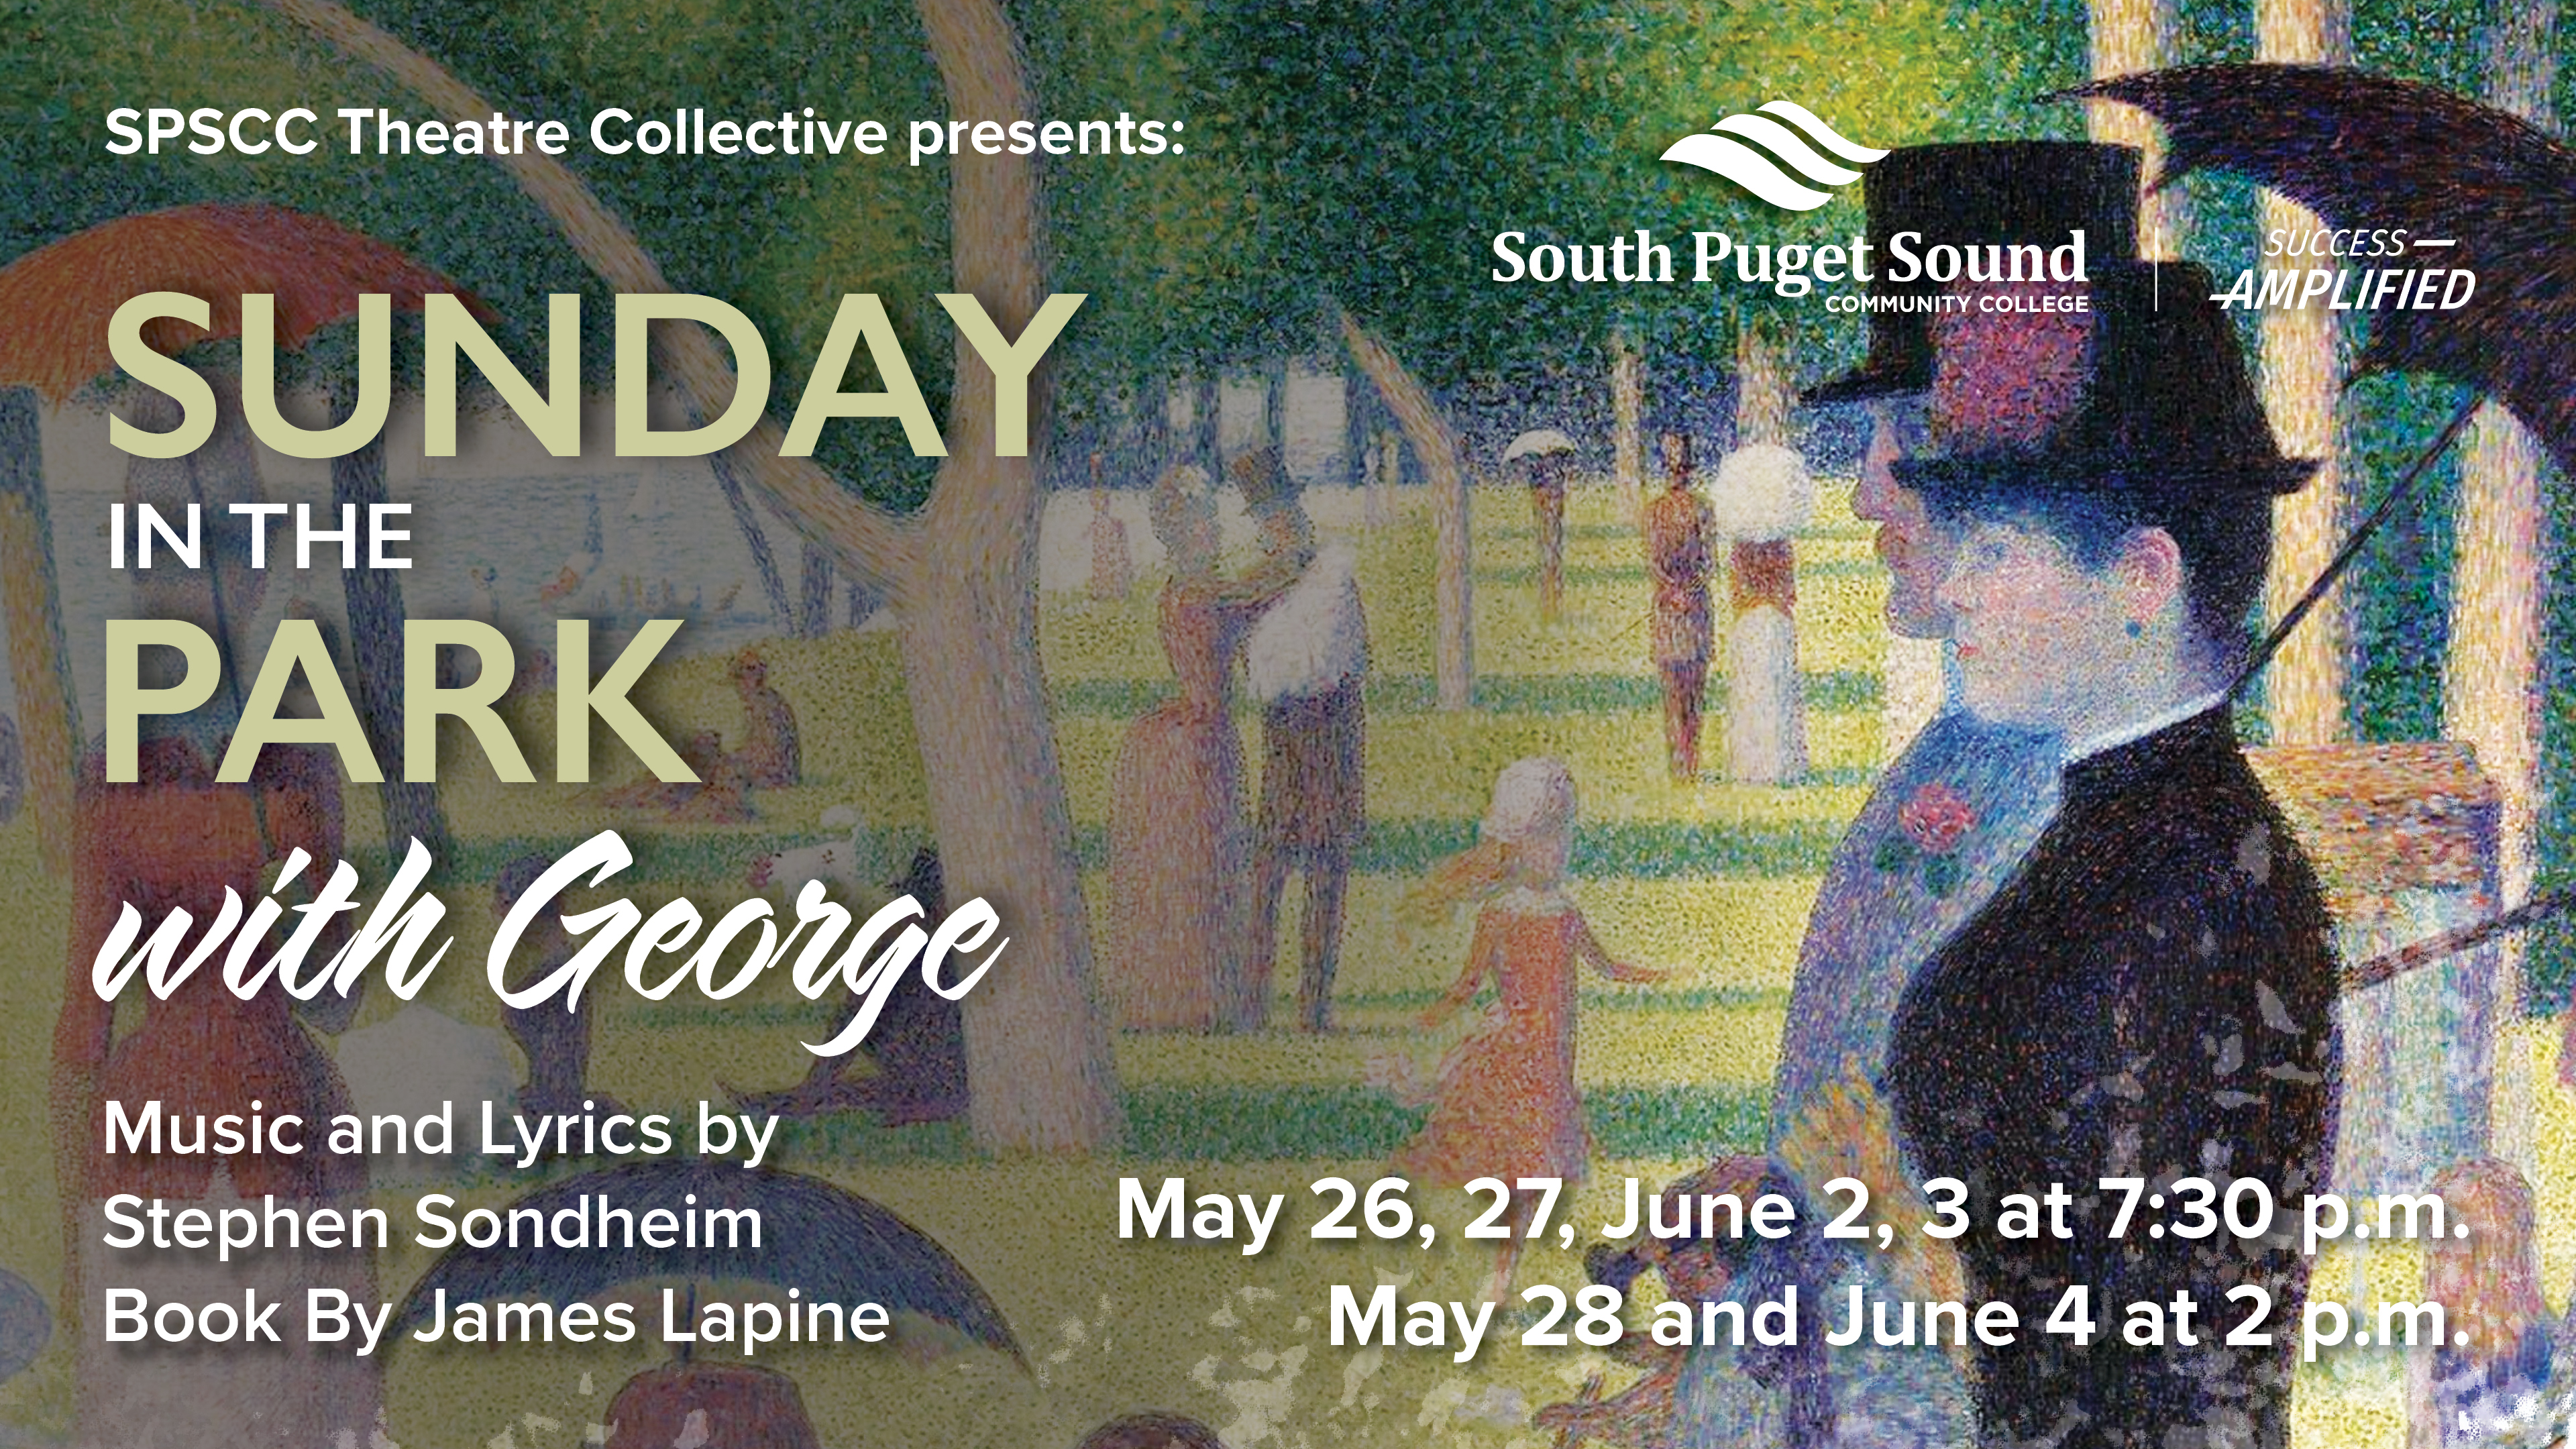 SPSCC Theatre Collective presents Sunday in the Park with George Music and Lyrics by Stephen Sondheim Book By James Lapine May 26, 27, June 2, 3 at 7:30 p.m. May 28 and June 4 at 2 p.m.